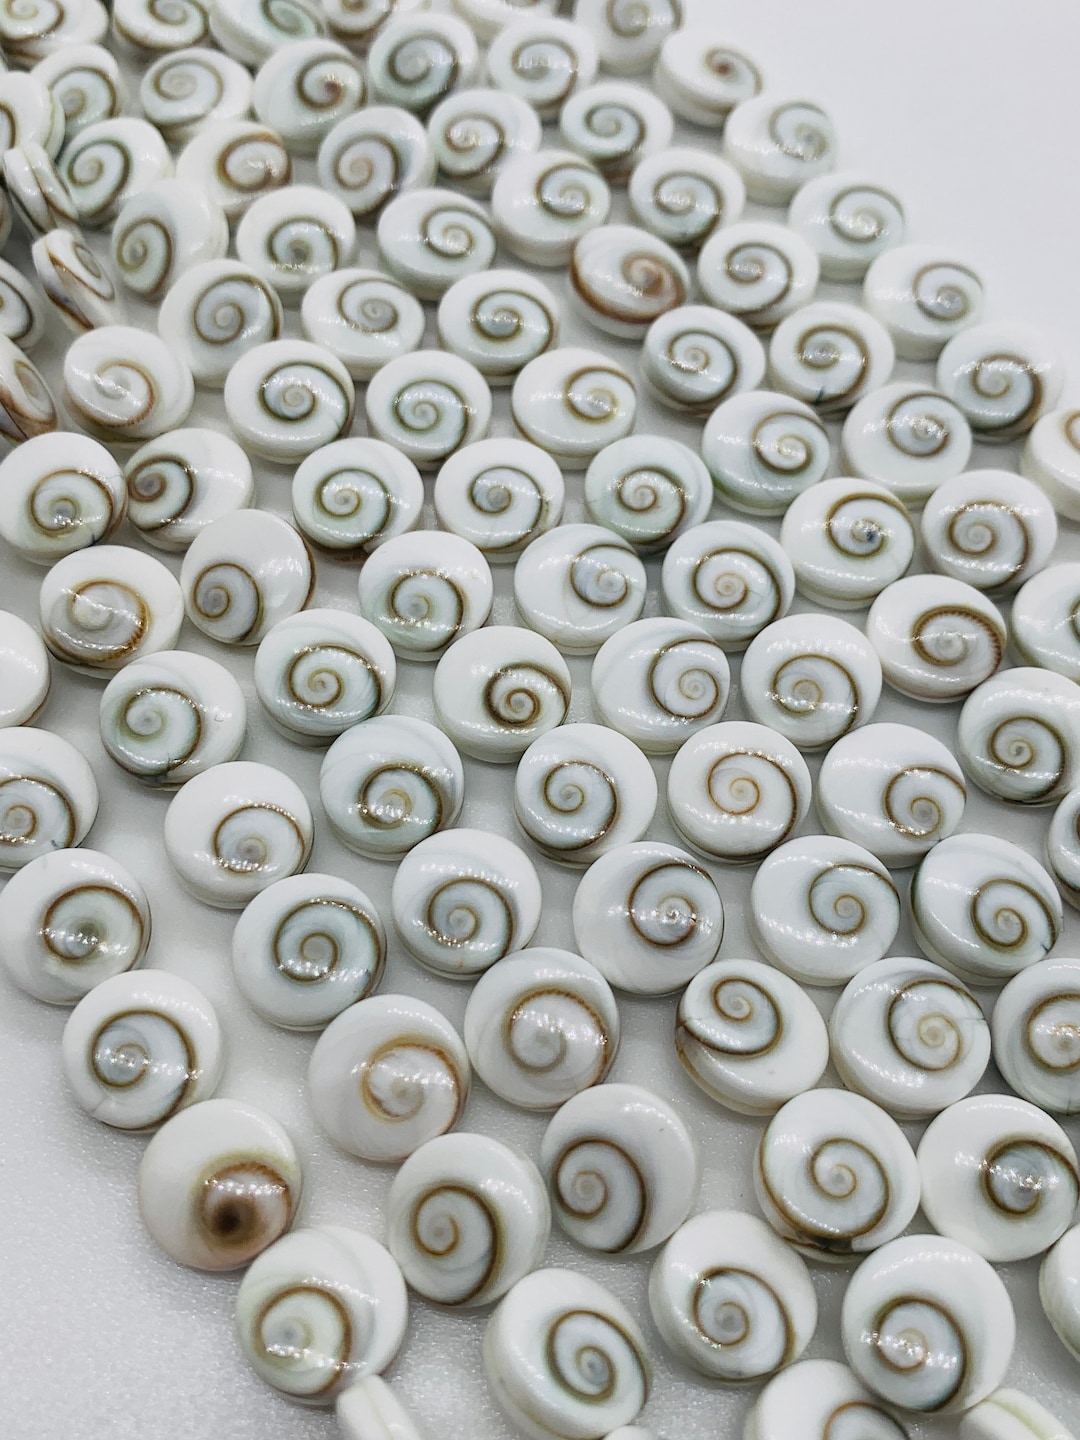 Shiva Eye Shell Beads Raw Organic Natural Fossil Domed Coin Disc